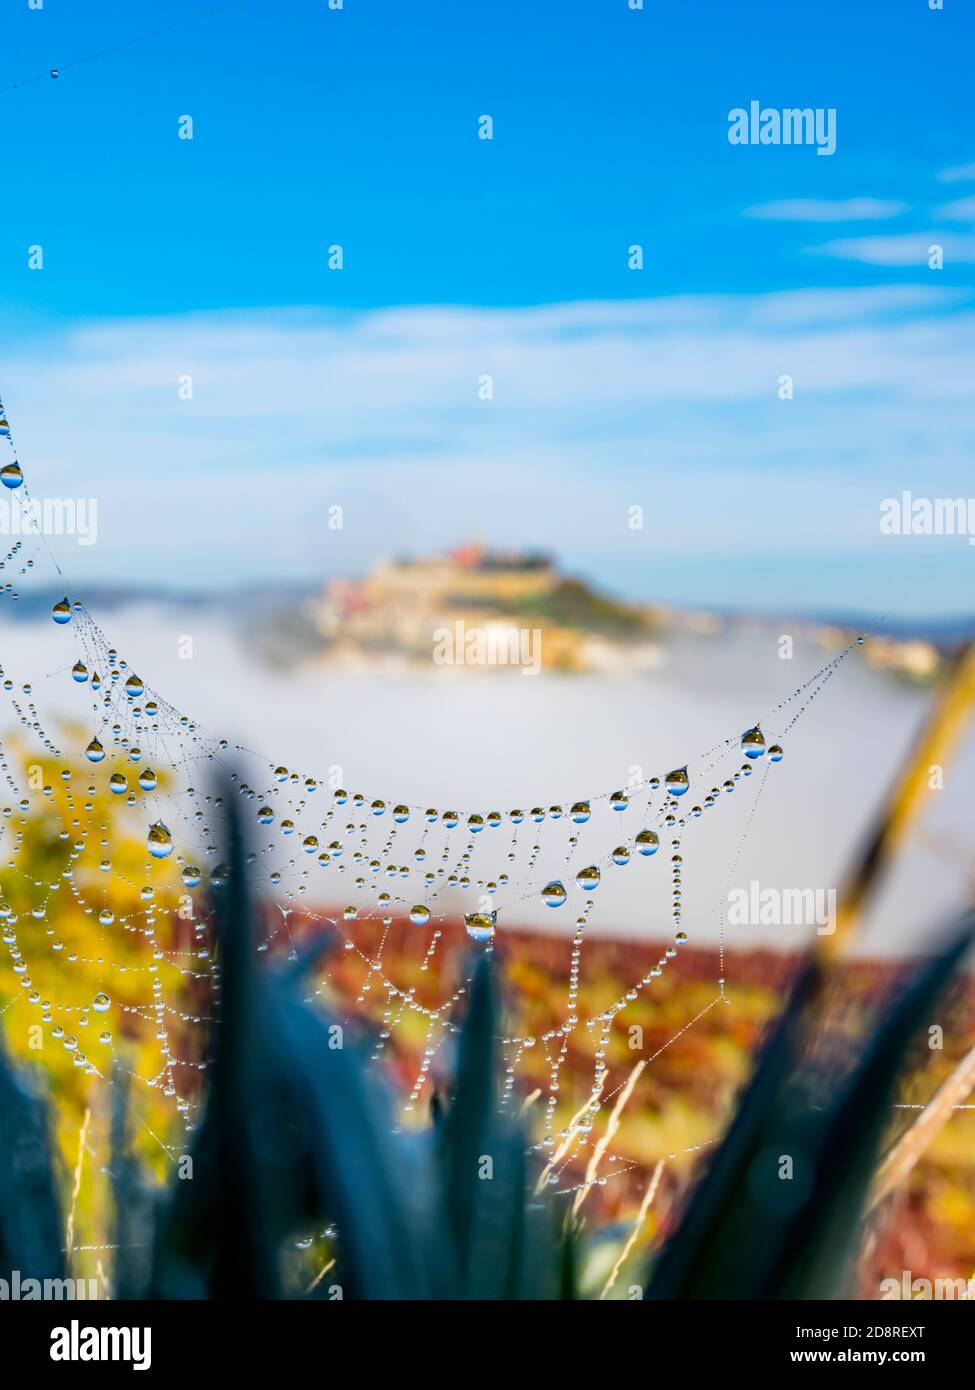 Spider web shiny water after rain droplets and like floating old town above thick fog Motovun in Istria Croatia Europe blurry bokeh blur in background Stock Photo